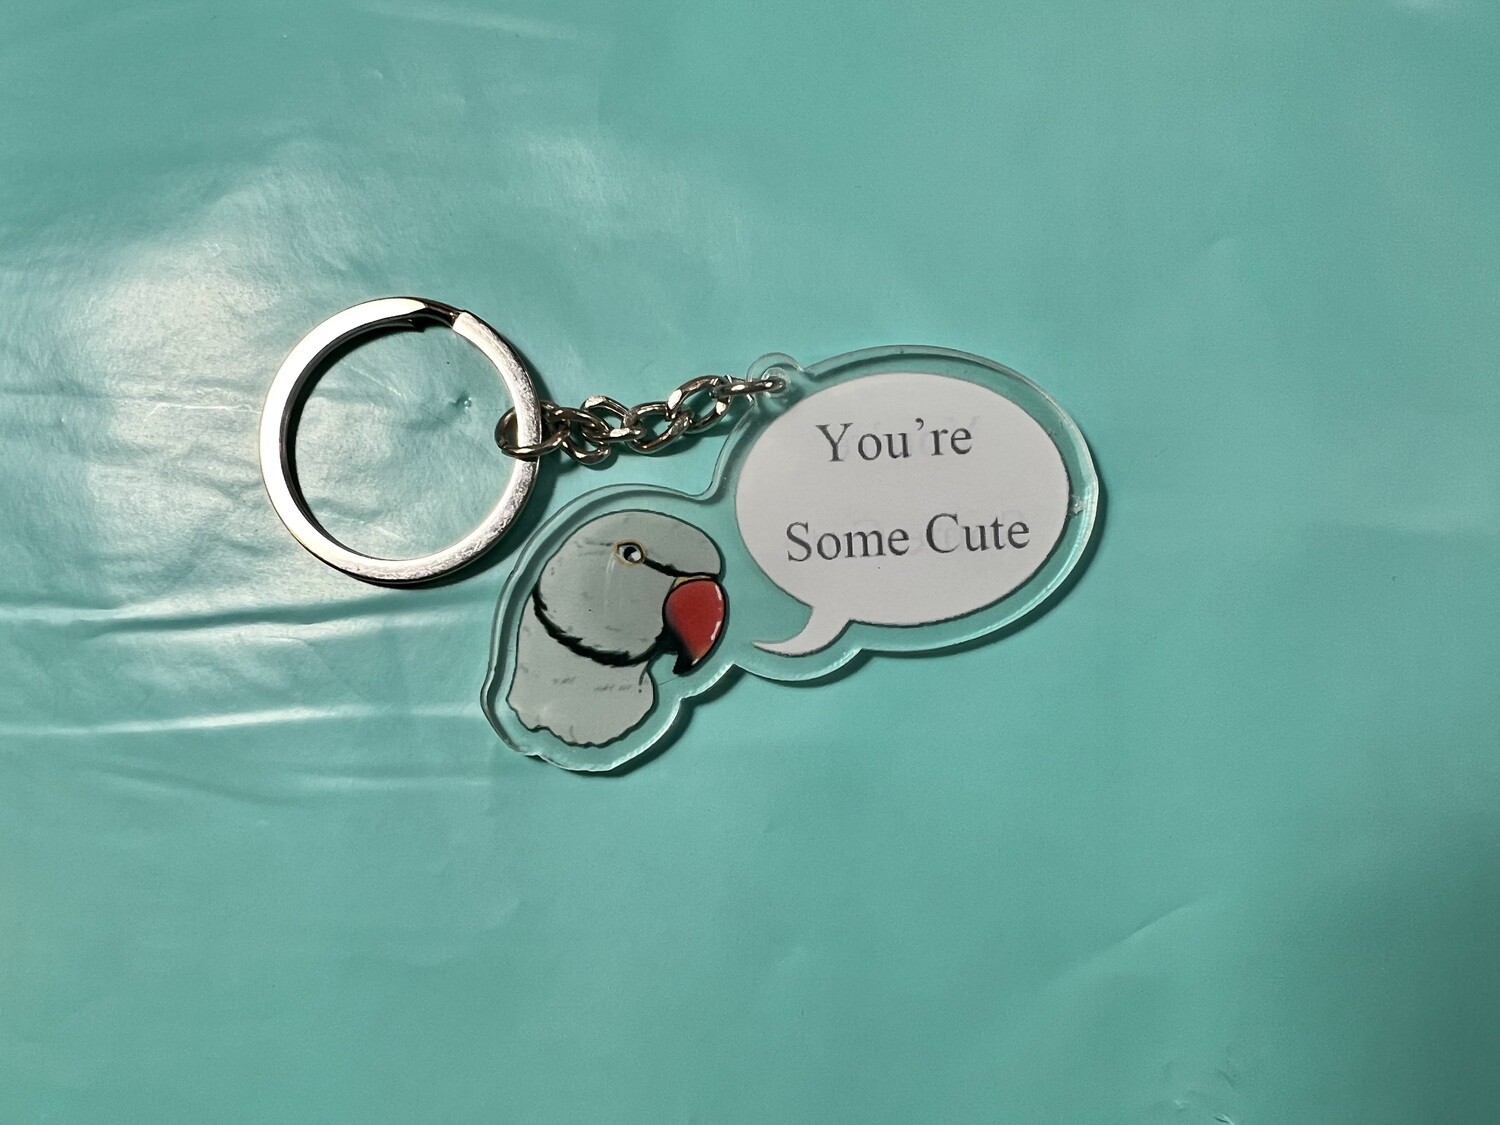 Bubble Head Keychain "You're Some Cute"